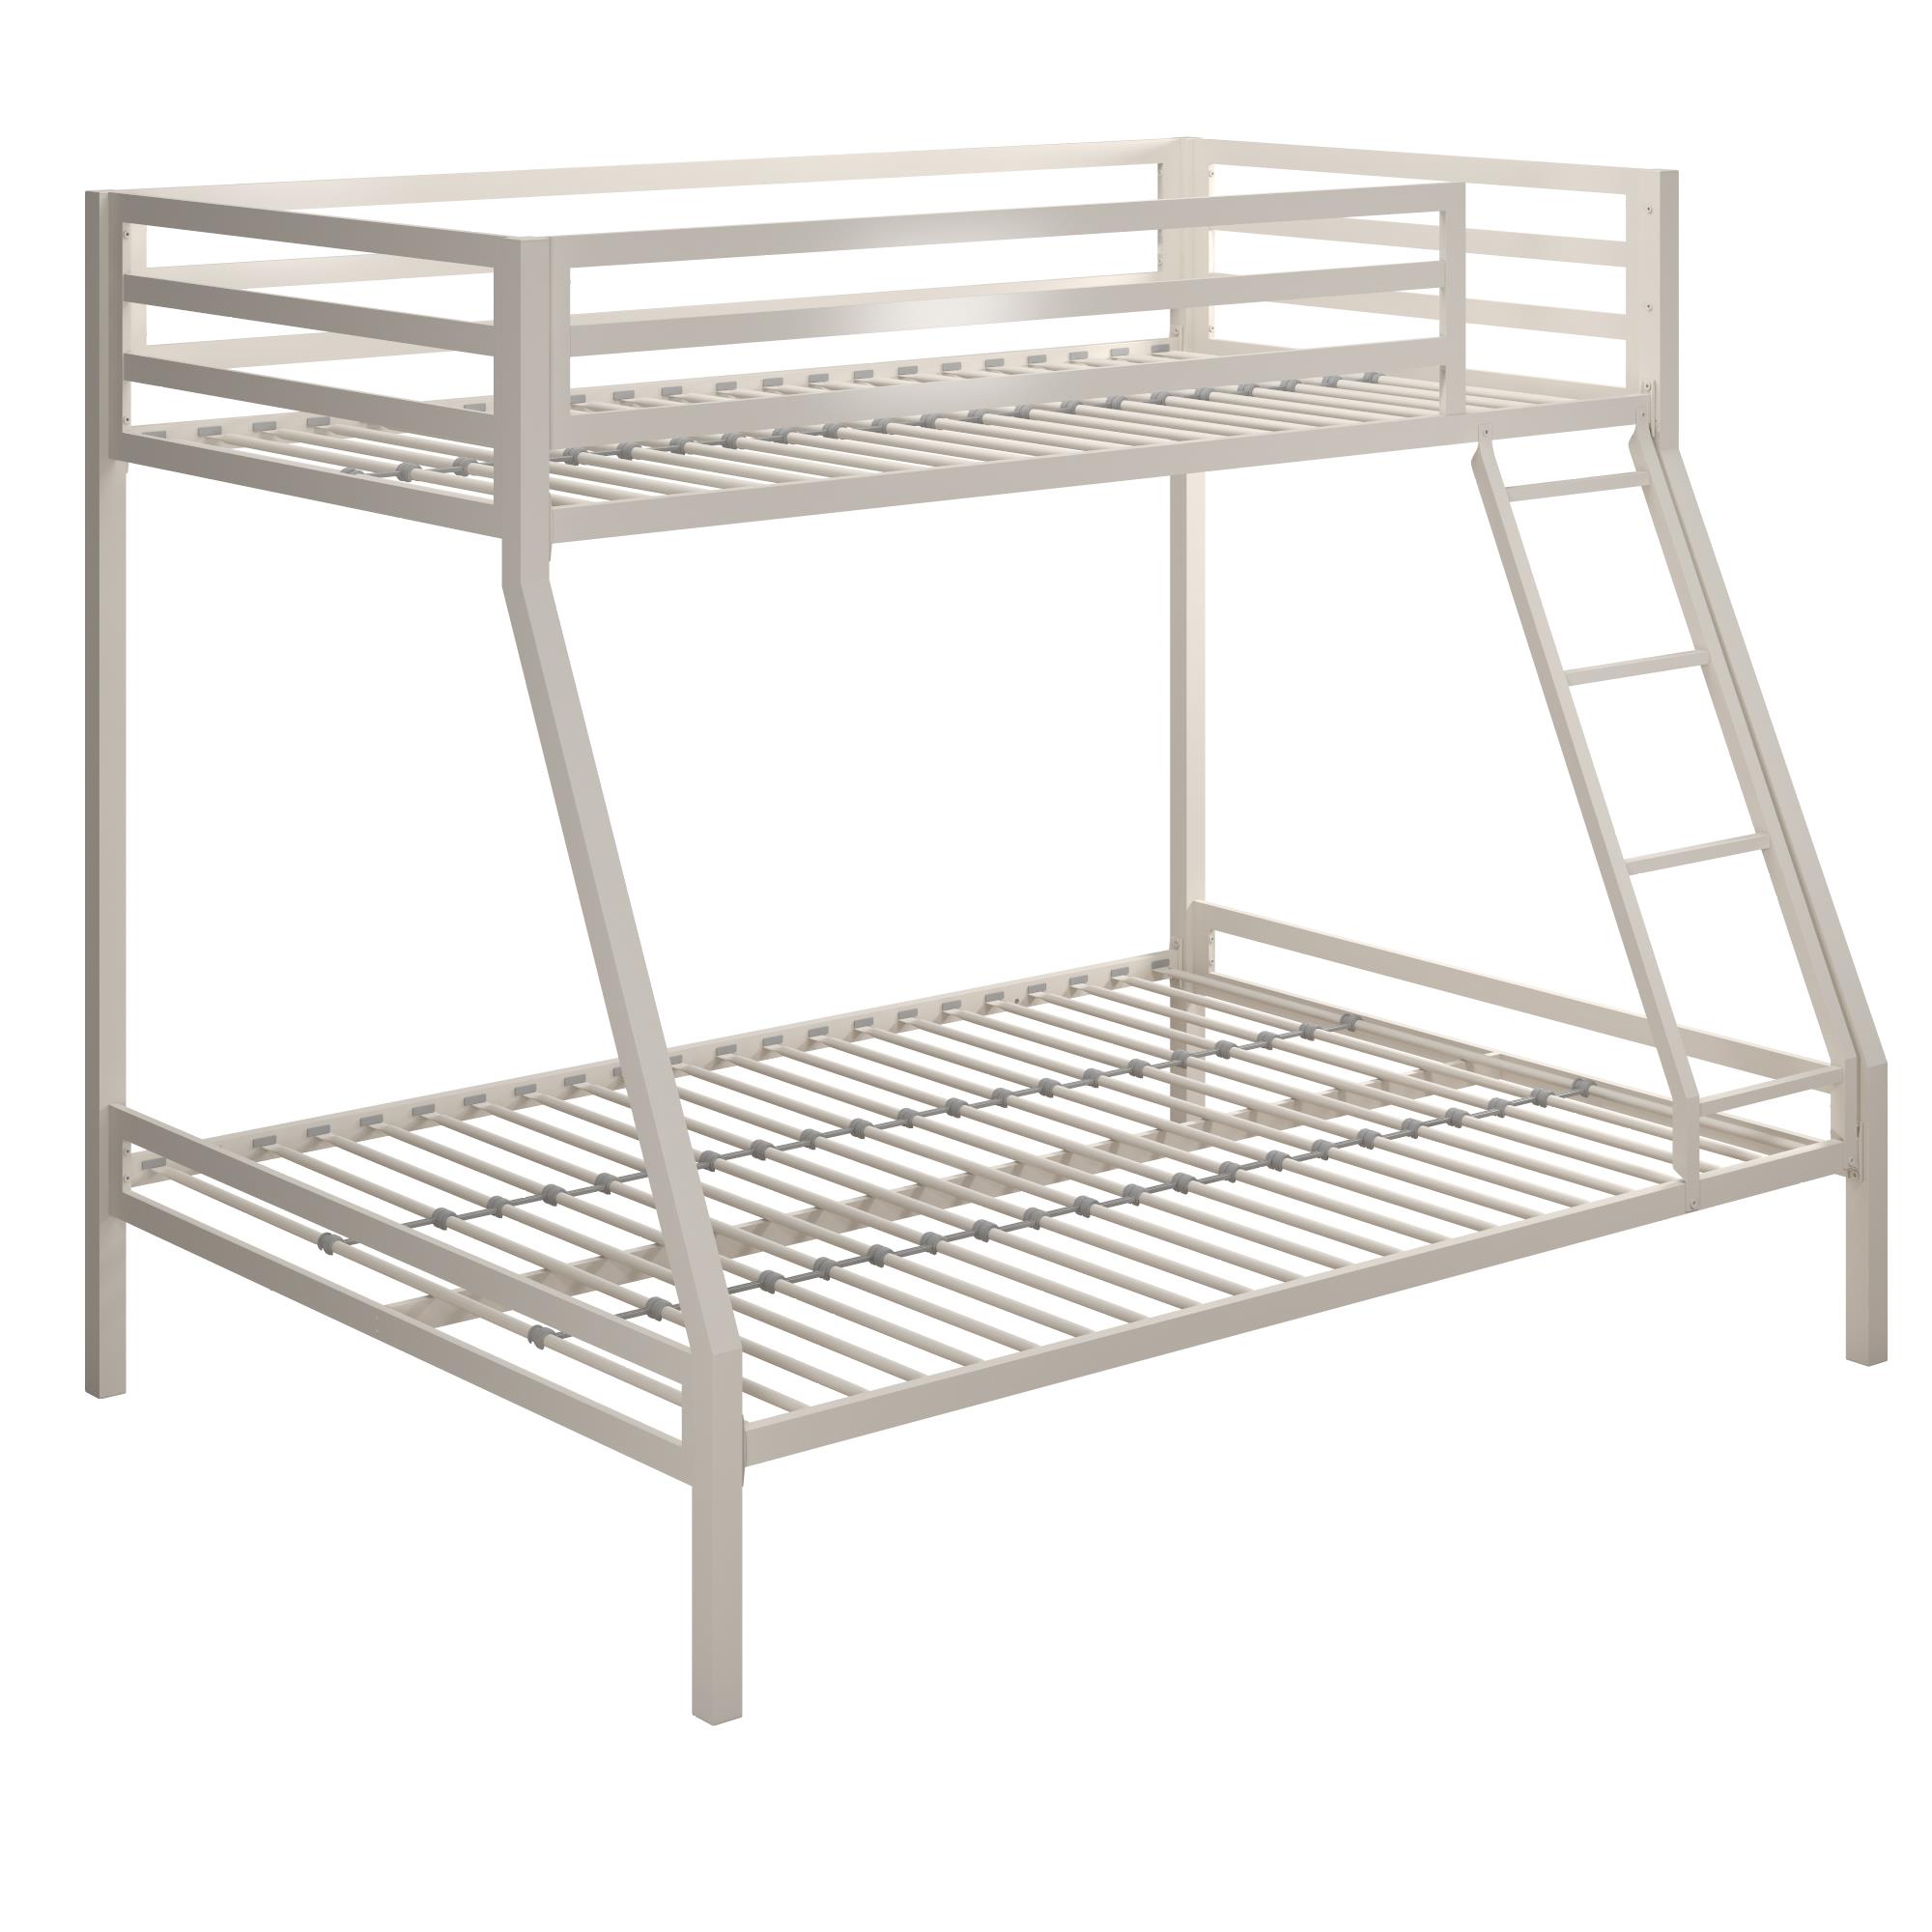 Mainstays Premium Twin over Full Metal Bunk Bed, Off White - image 8 of 13